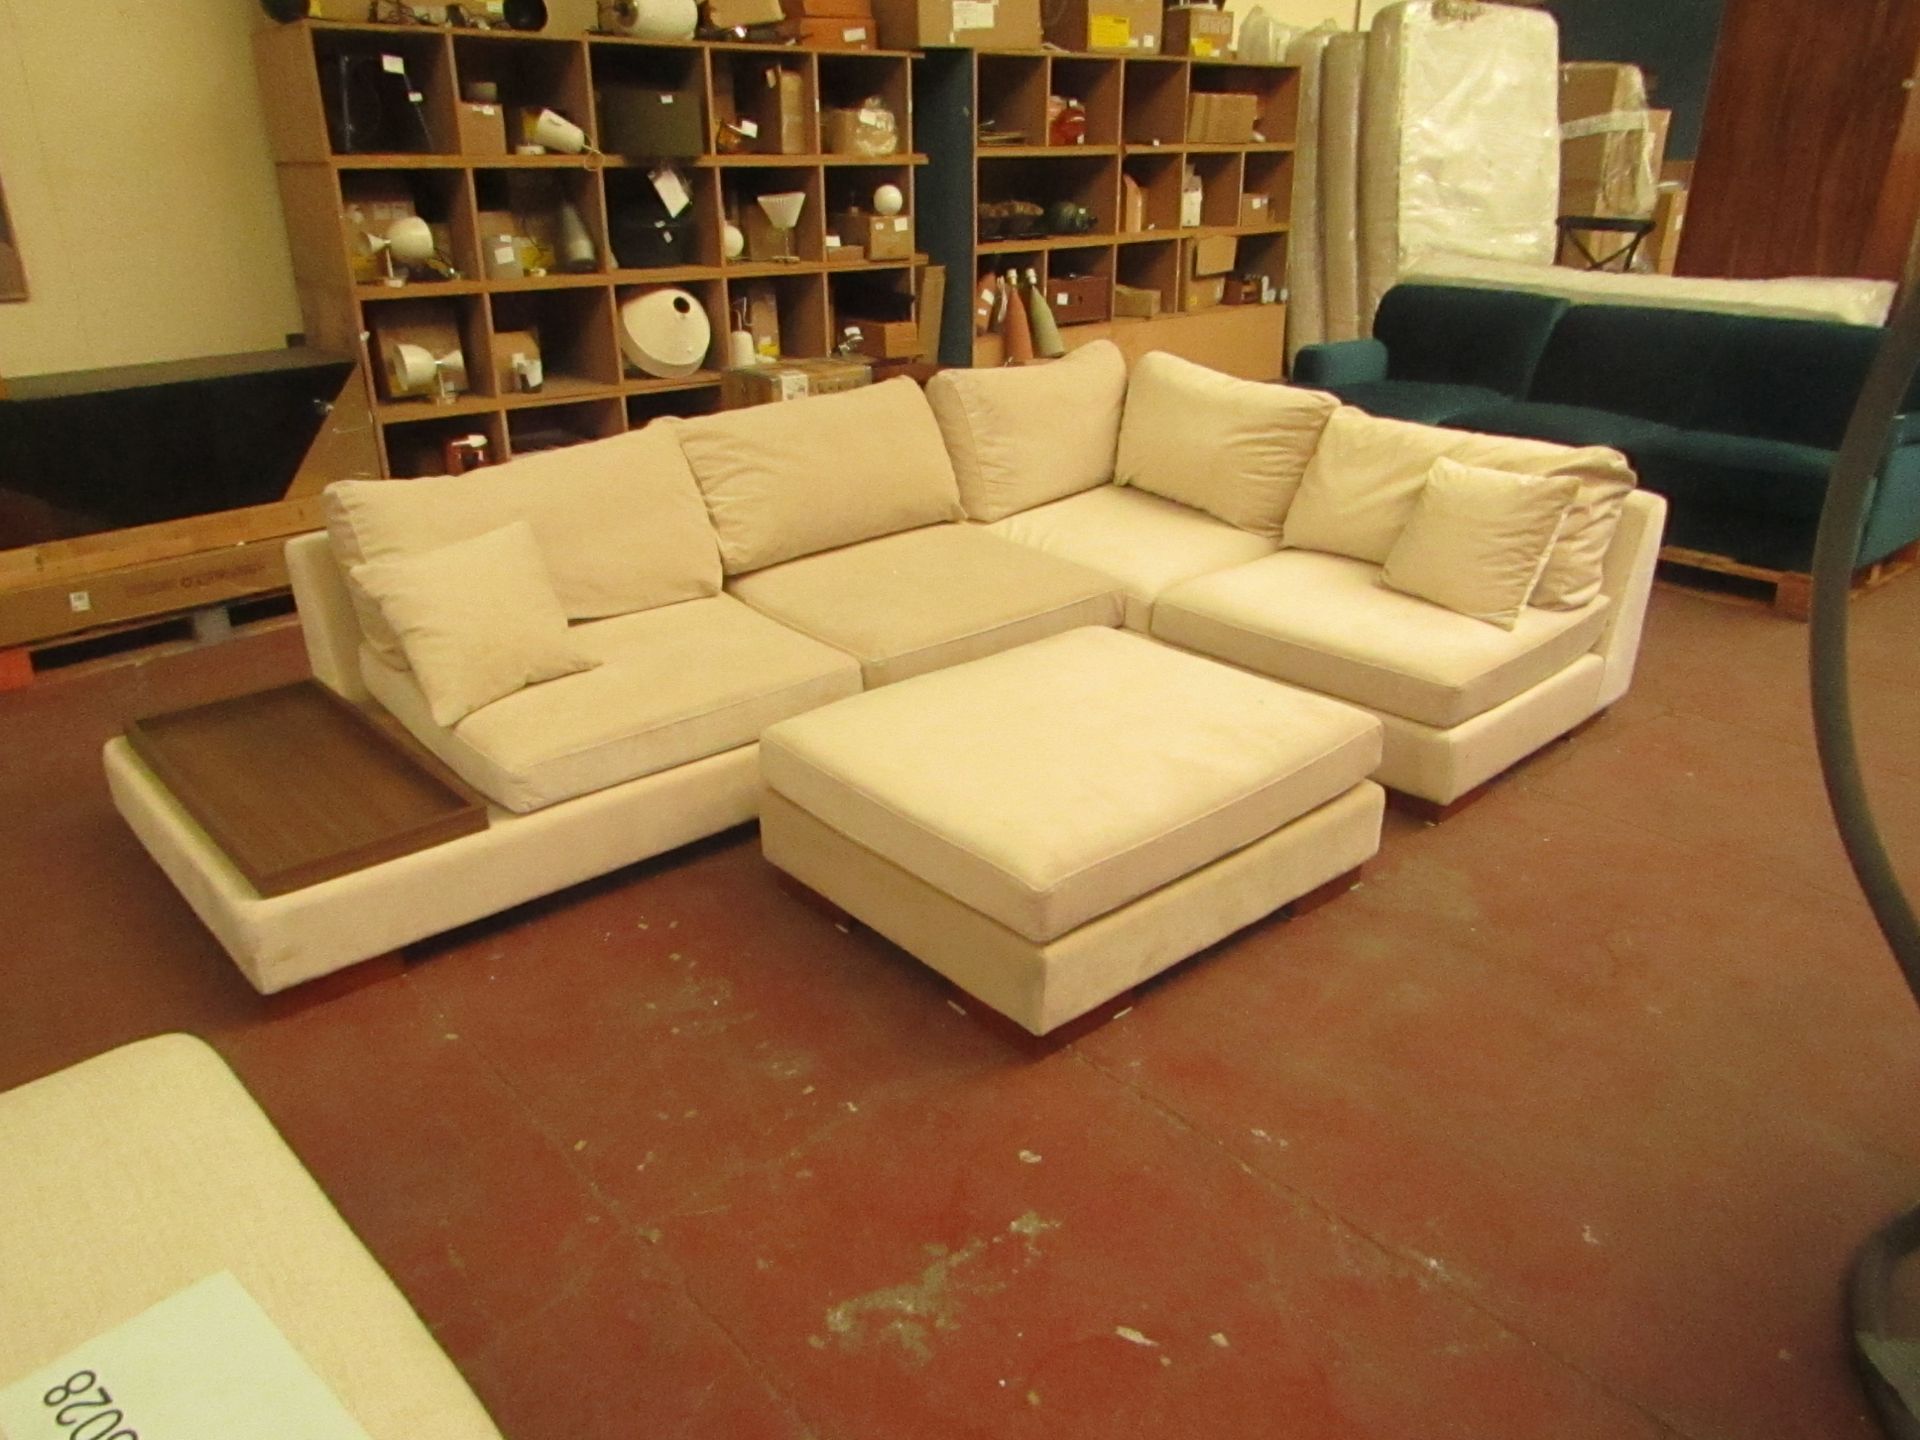 | 1X | VIVENSE TULIP CORNER SOFA AND TULIP POUFFE | FEW SCUFFS AND NEEDS A CLEAN BUT OTHERWISE